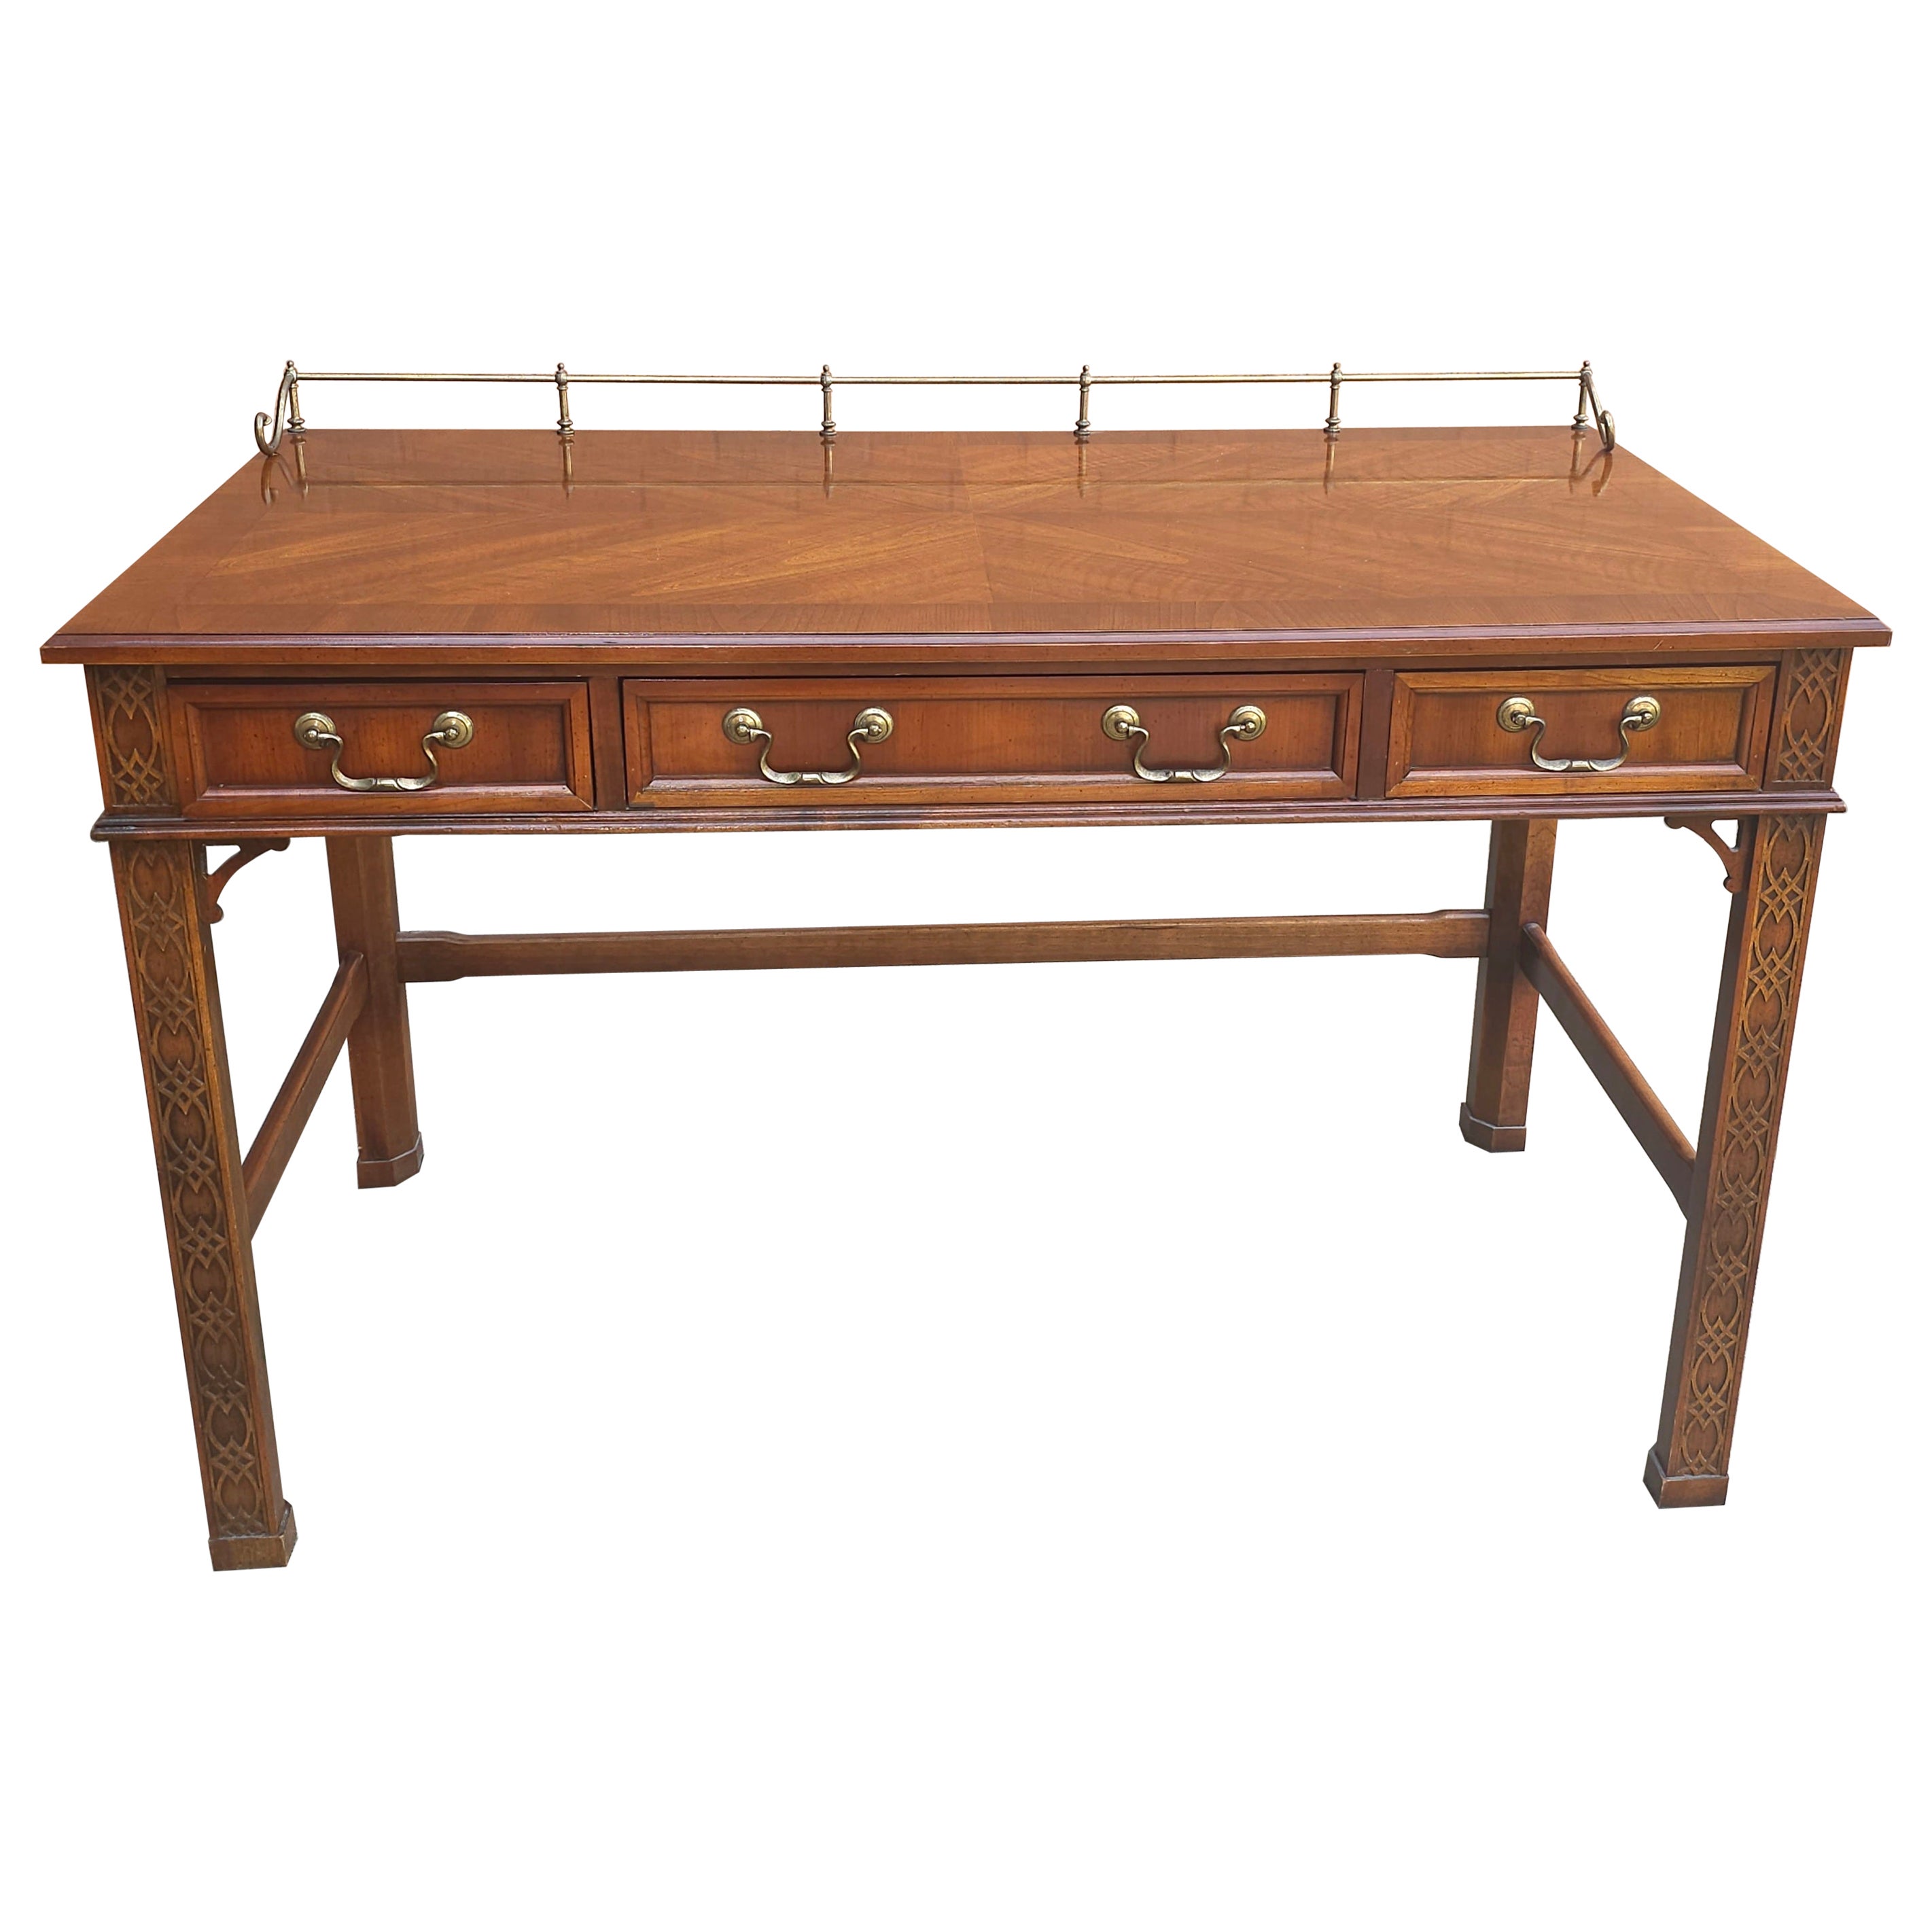 George III Style Blind Fretwork Mahogany Table Desk w/ Gallery For Sale